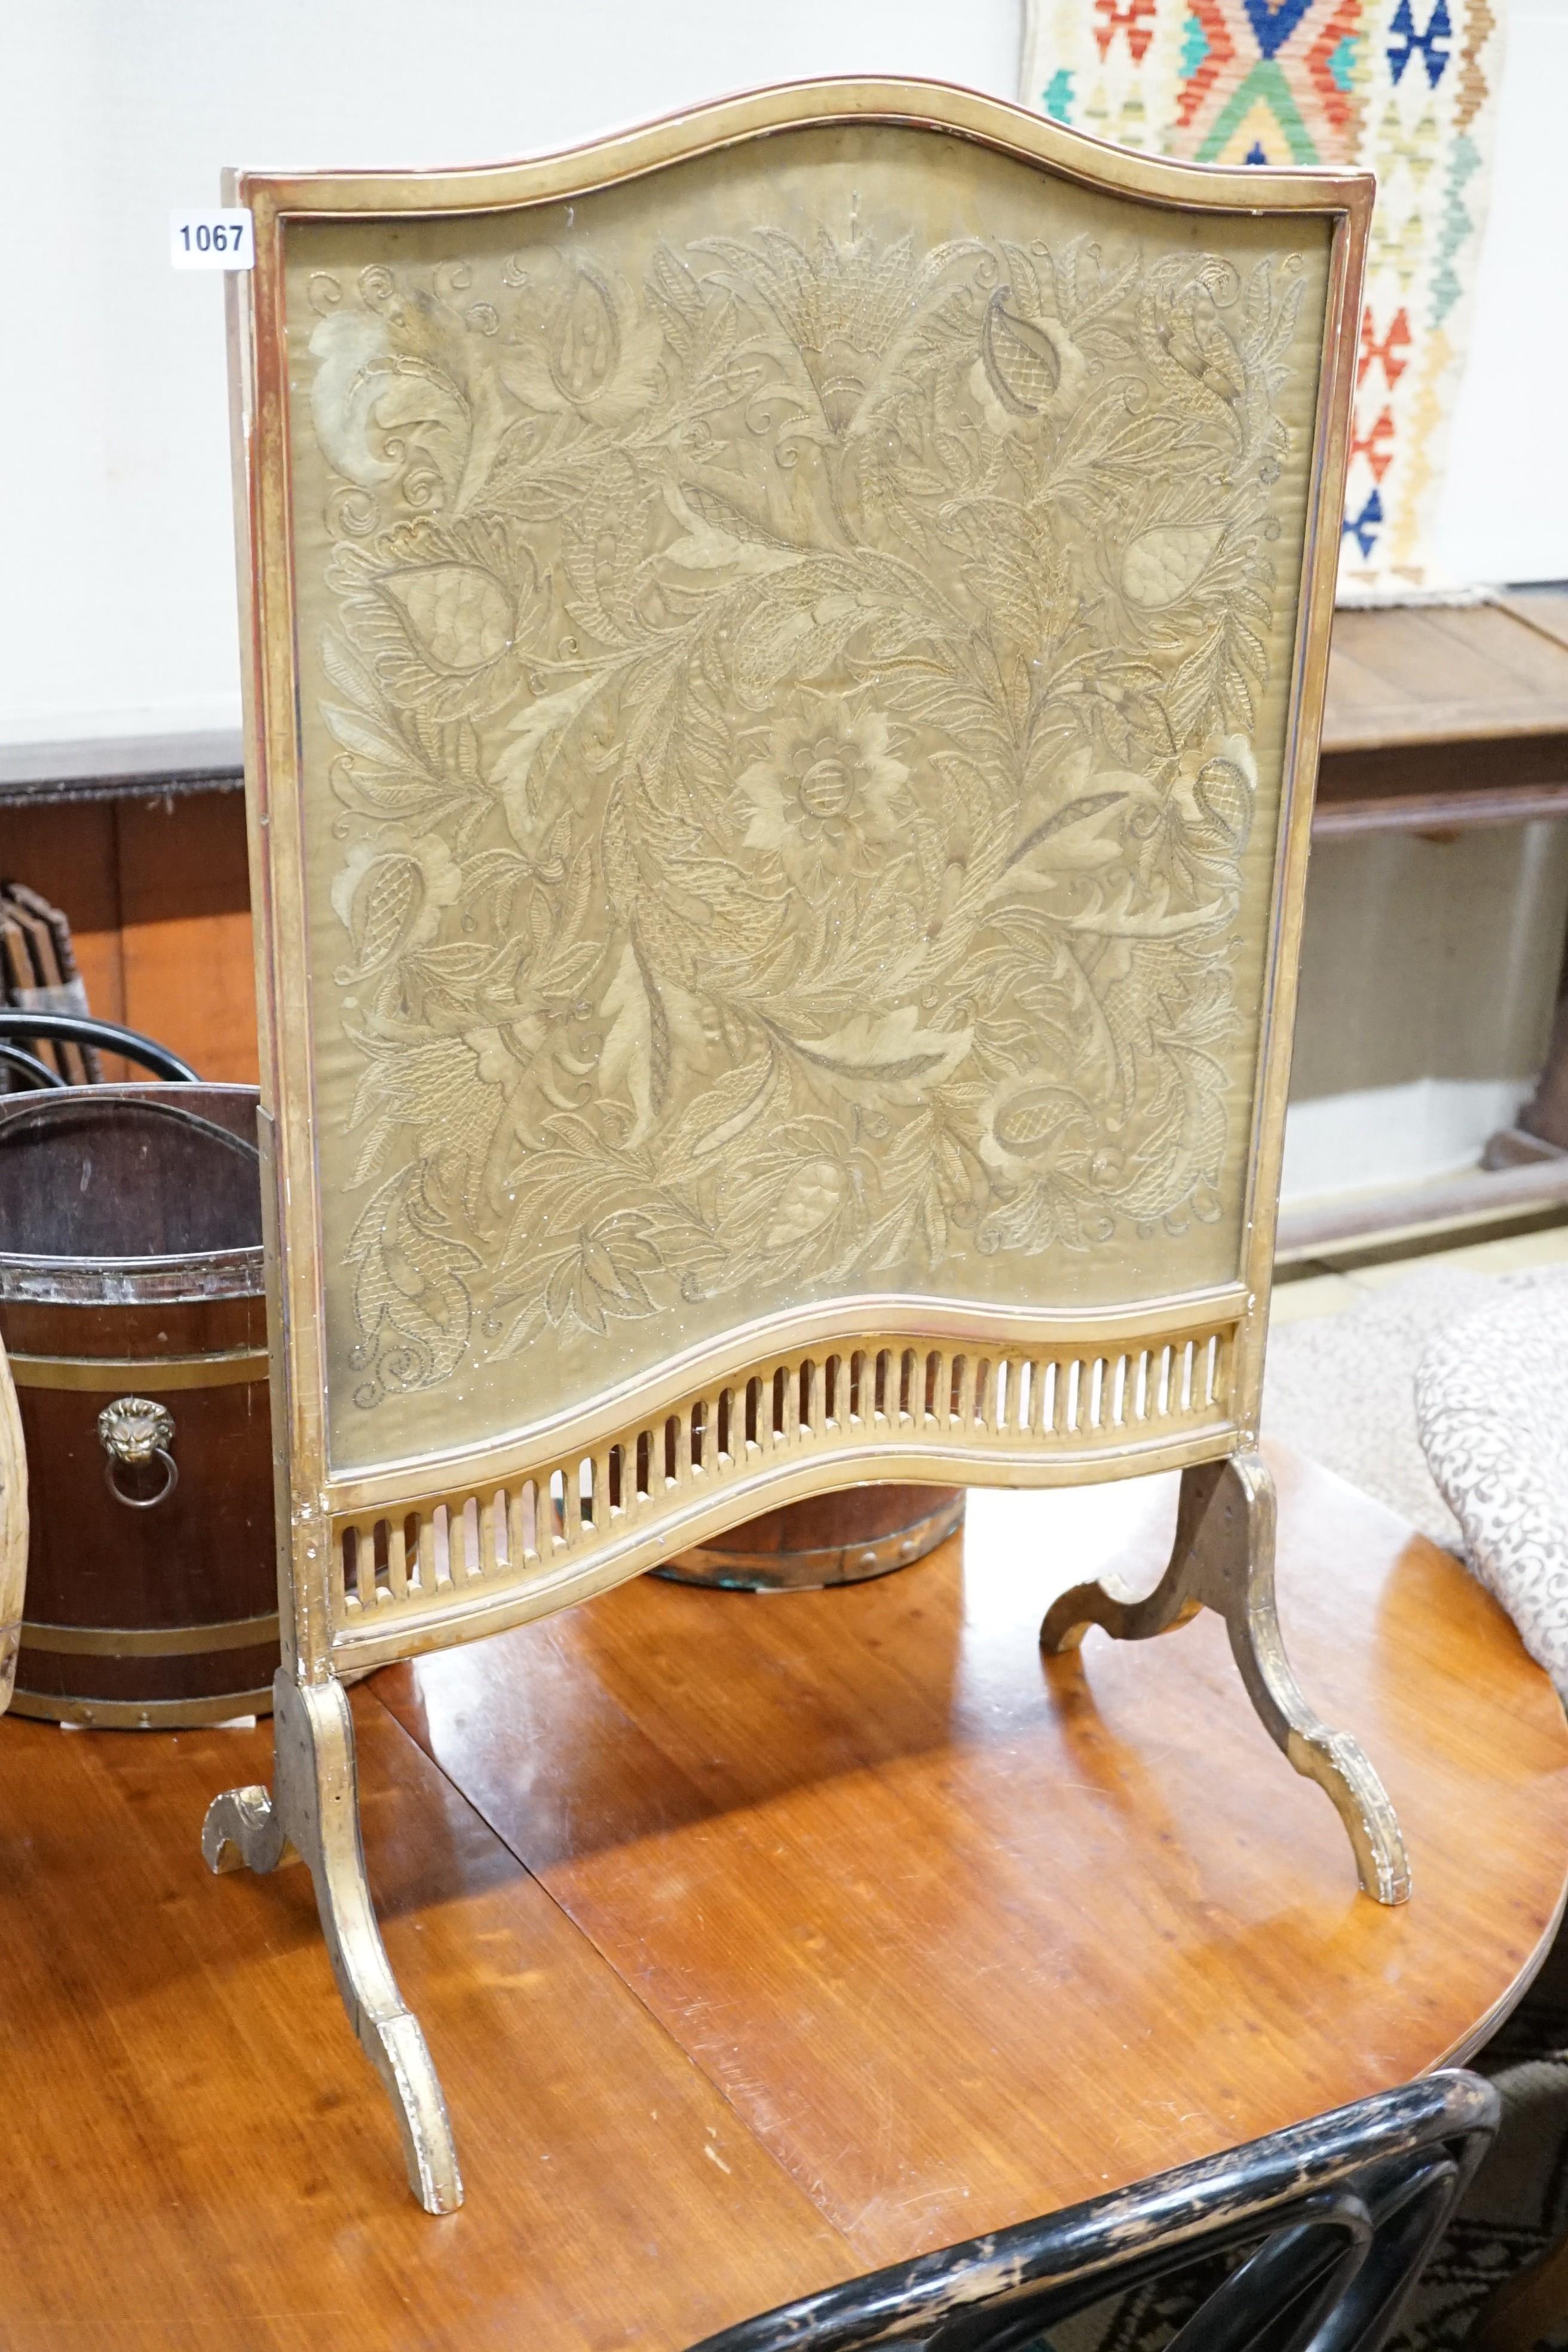 A carved gilt wood fire screen with internal needlework panel, width 56cm, height 92cm